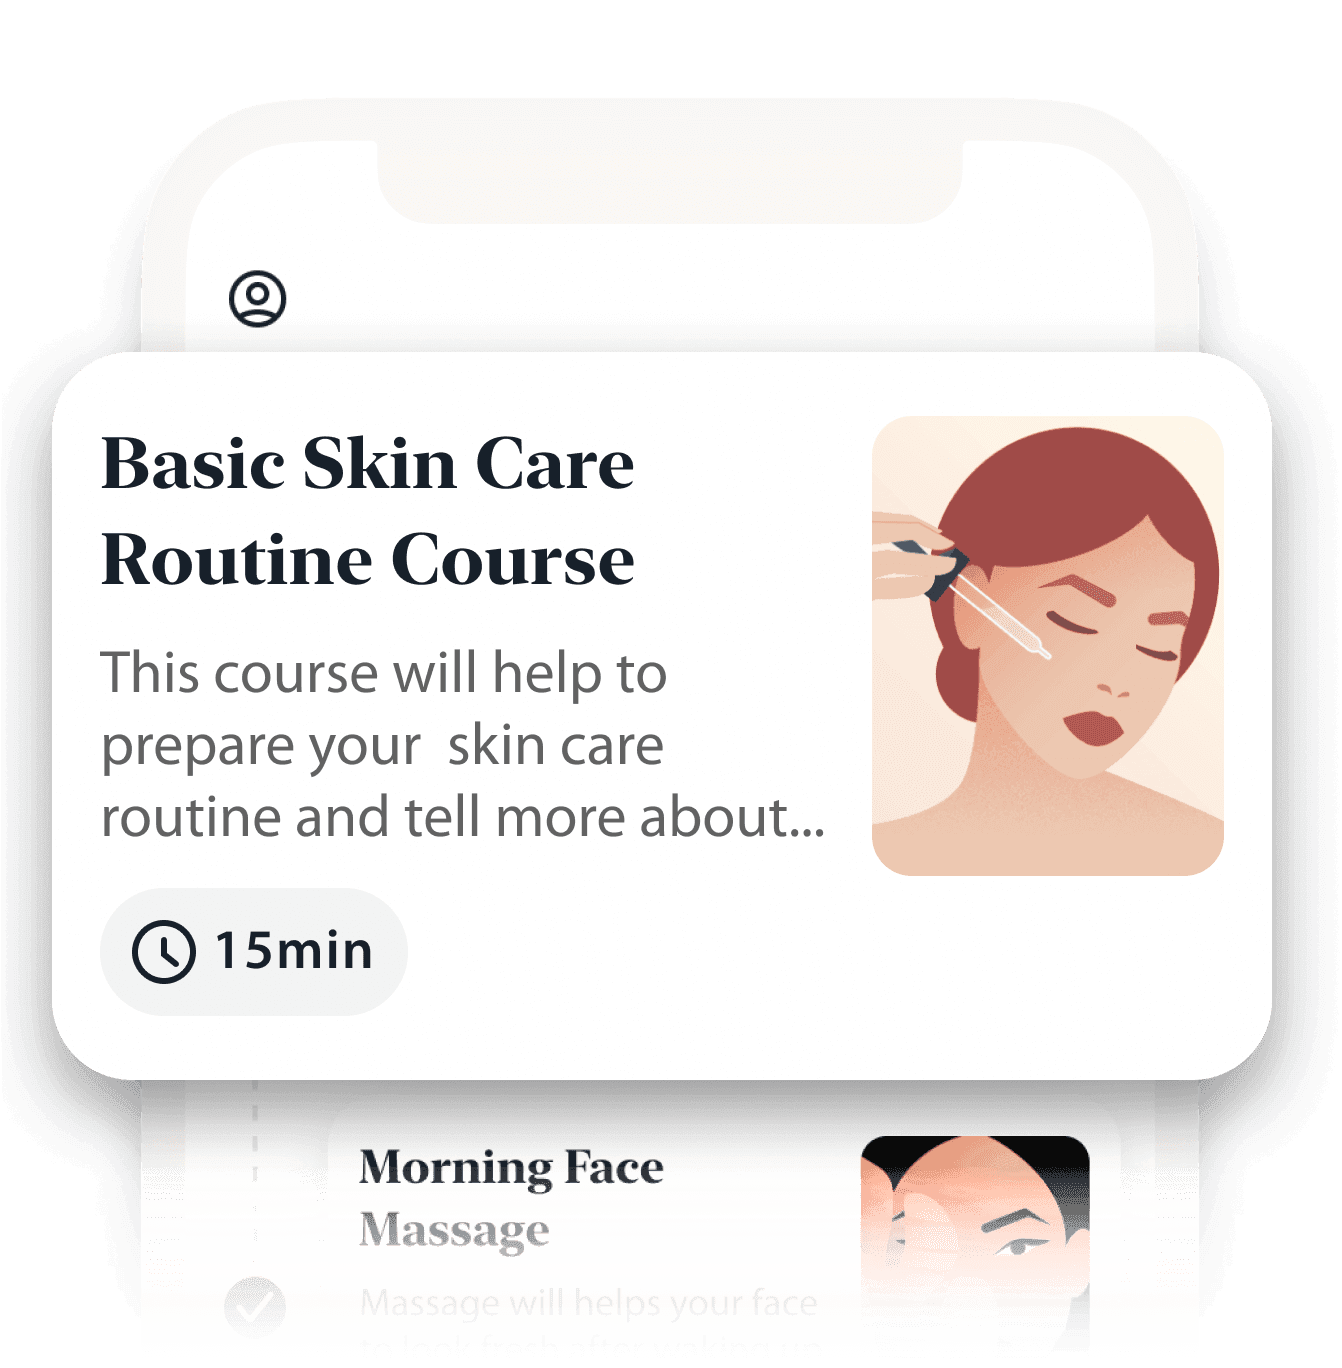 Luvly skin care course